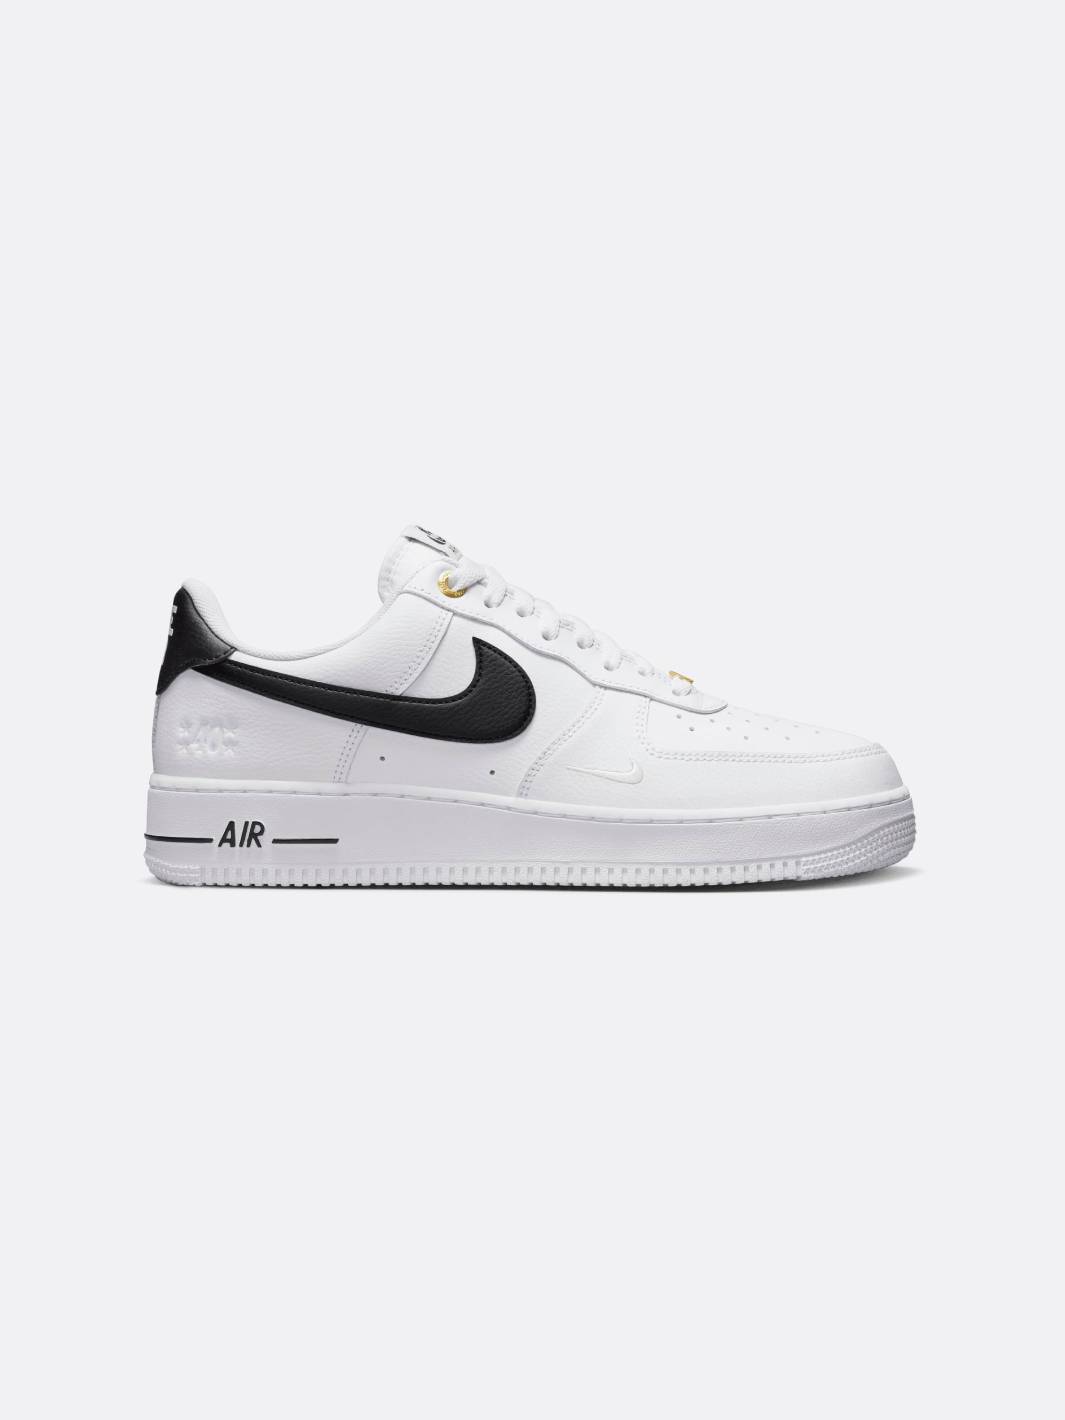 Nike Air Force 1 '07 LV8 - Nohble